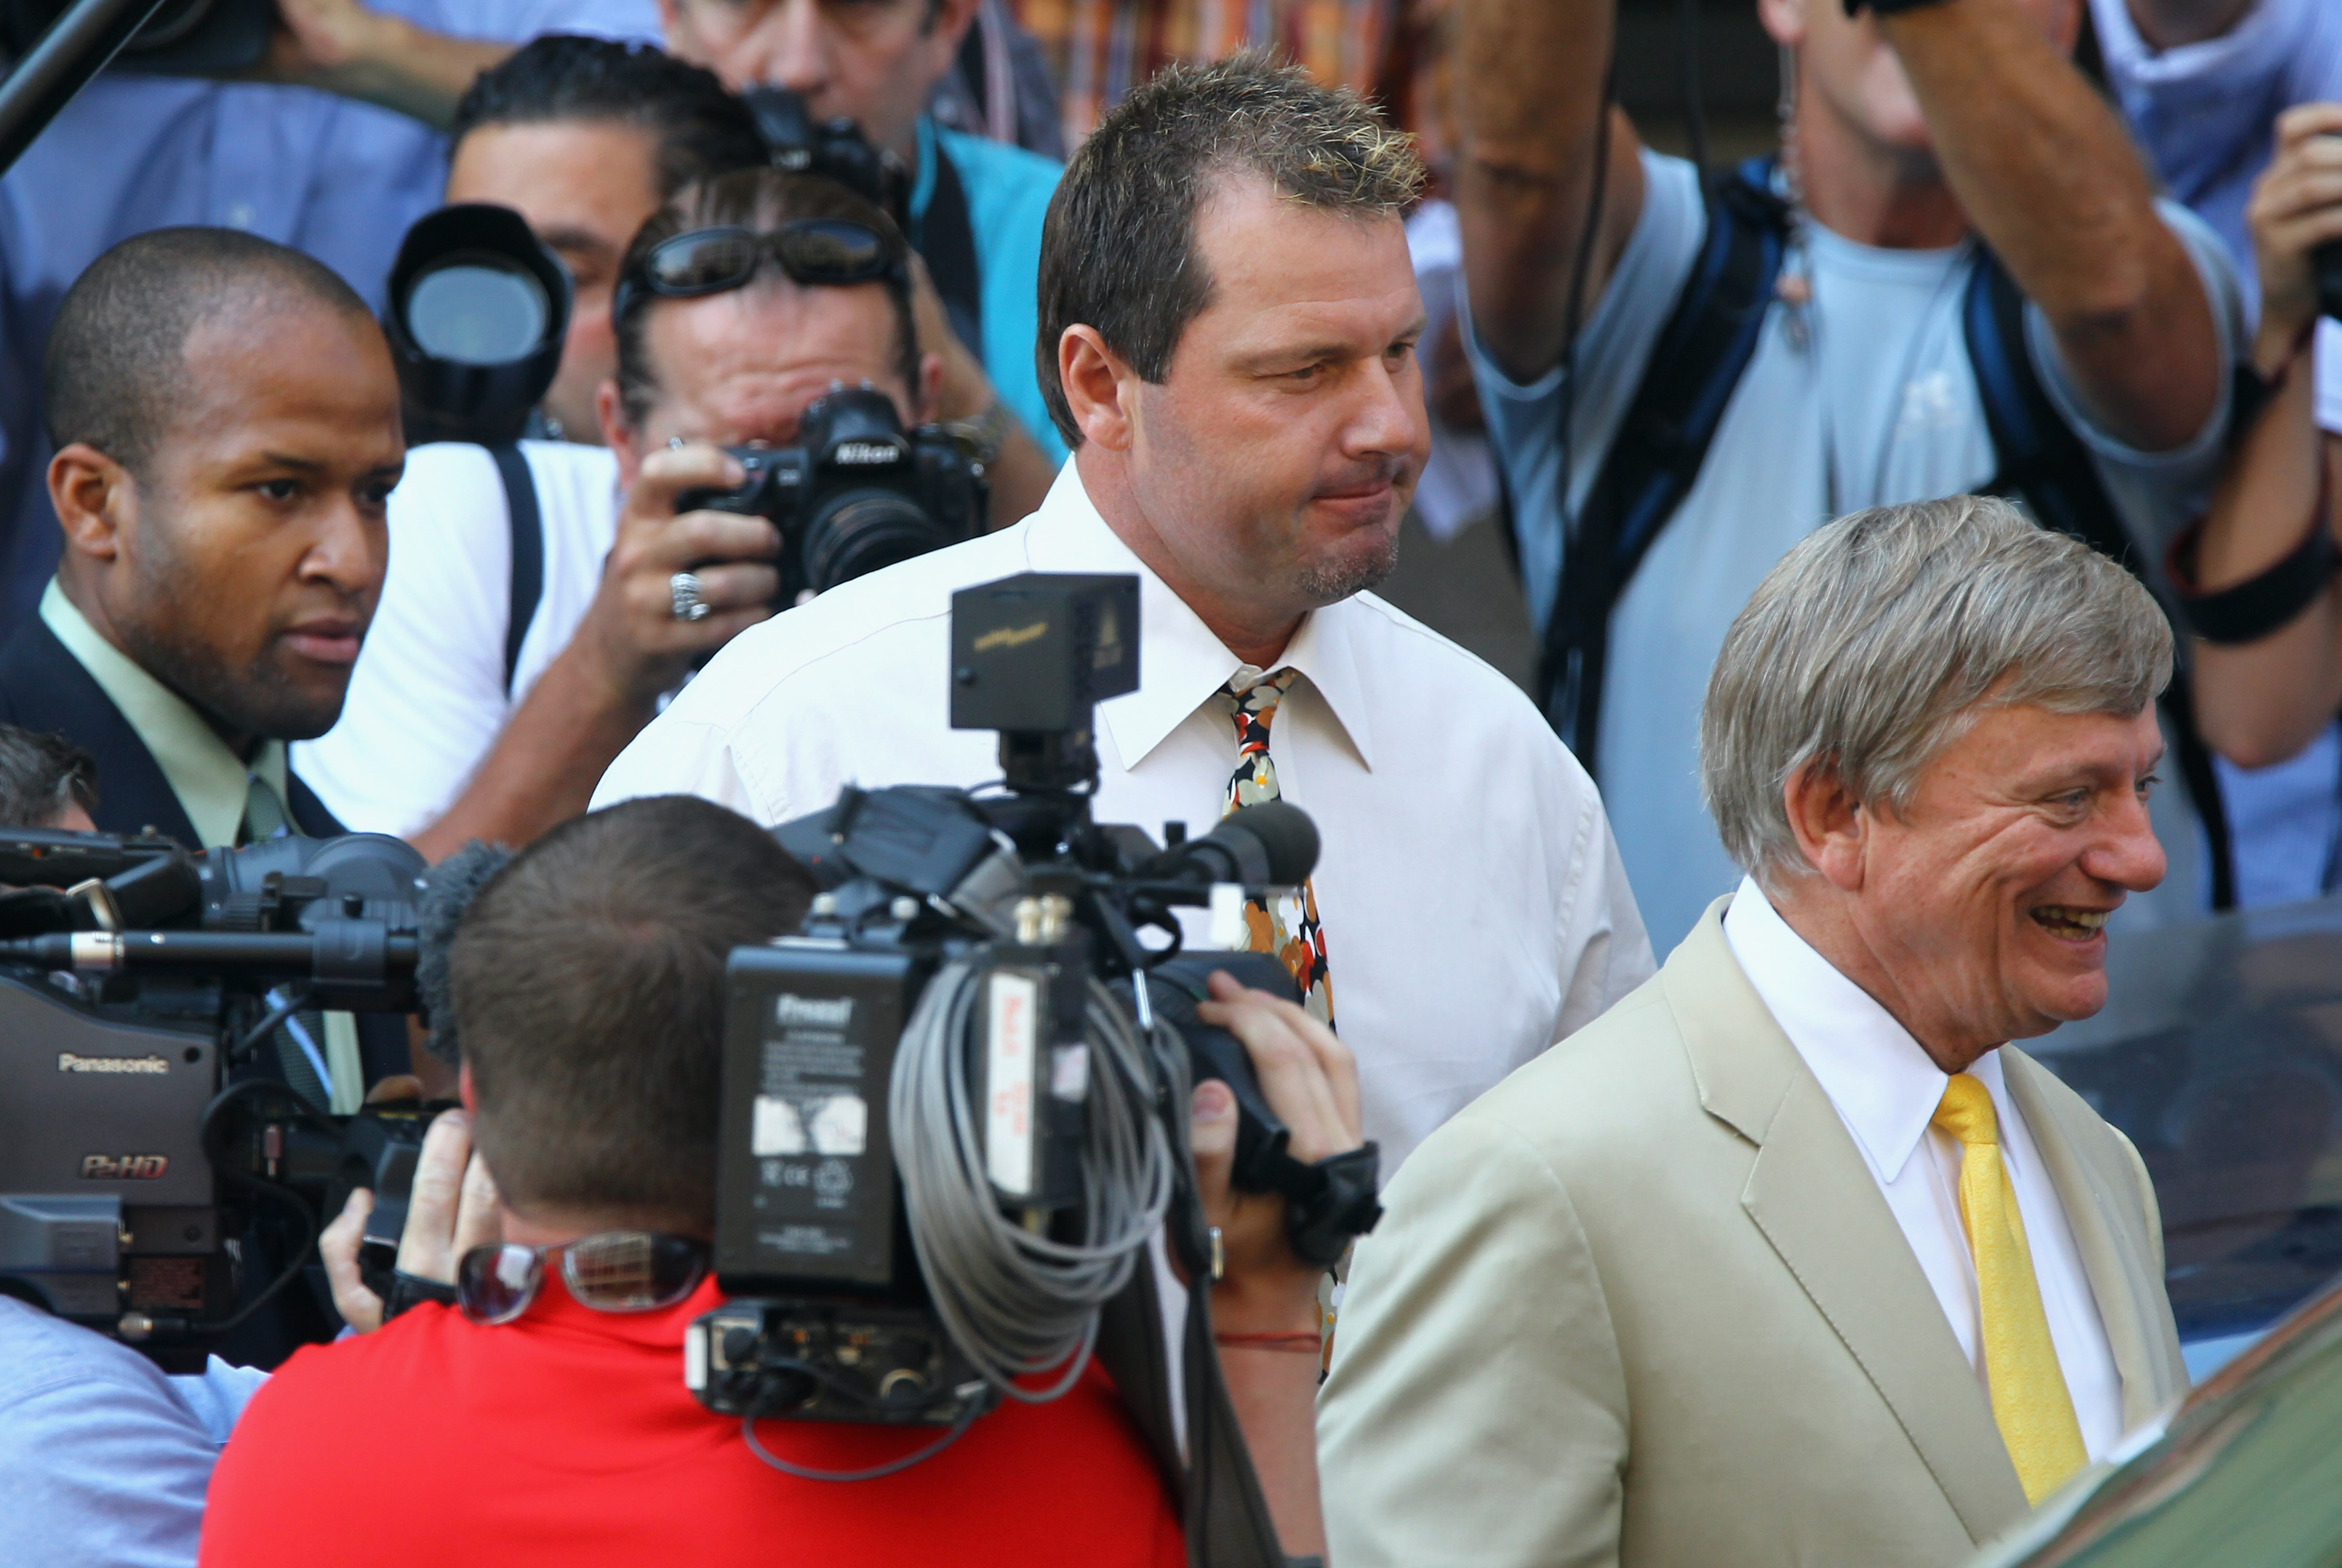 WASHINGTON - AUGUST 30:  Baseball pitching star Roger Clemens walks out of the U.S. District Court after his arraignment, on August 30, 2010 in Washington, DC. Seven-time Cy Young Award winner Clemens who plead not-guilty was charged with making false sta